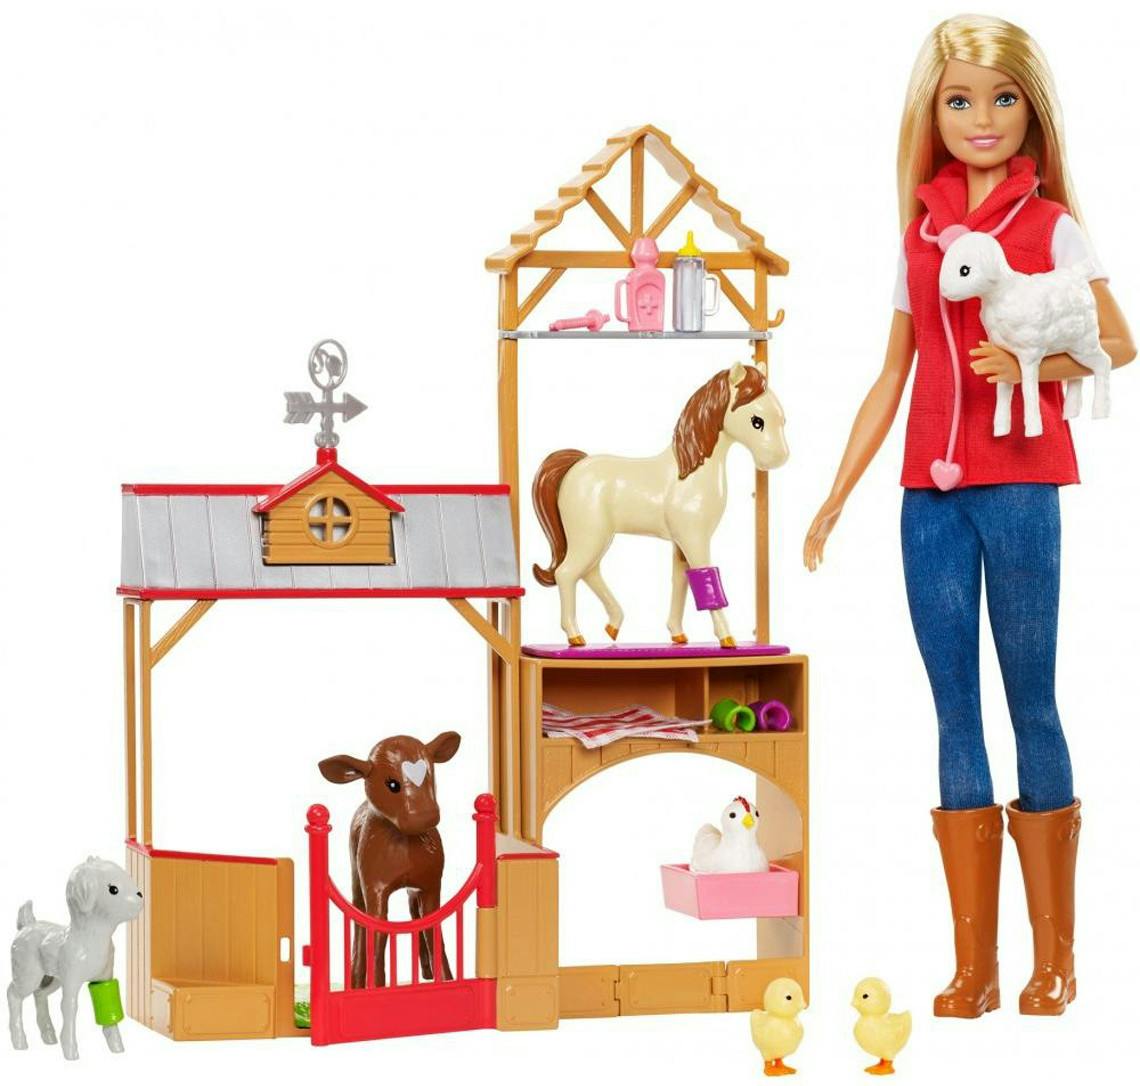 farmer barbie with chicken coop